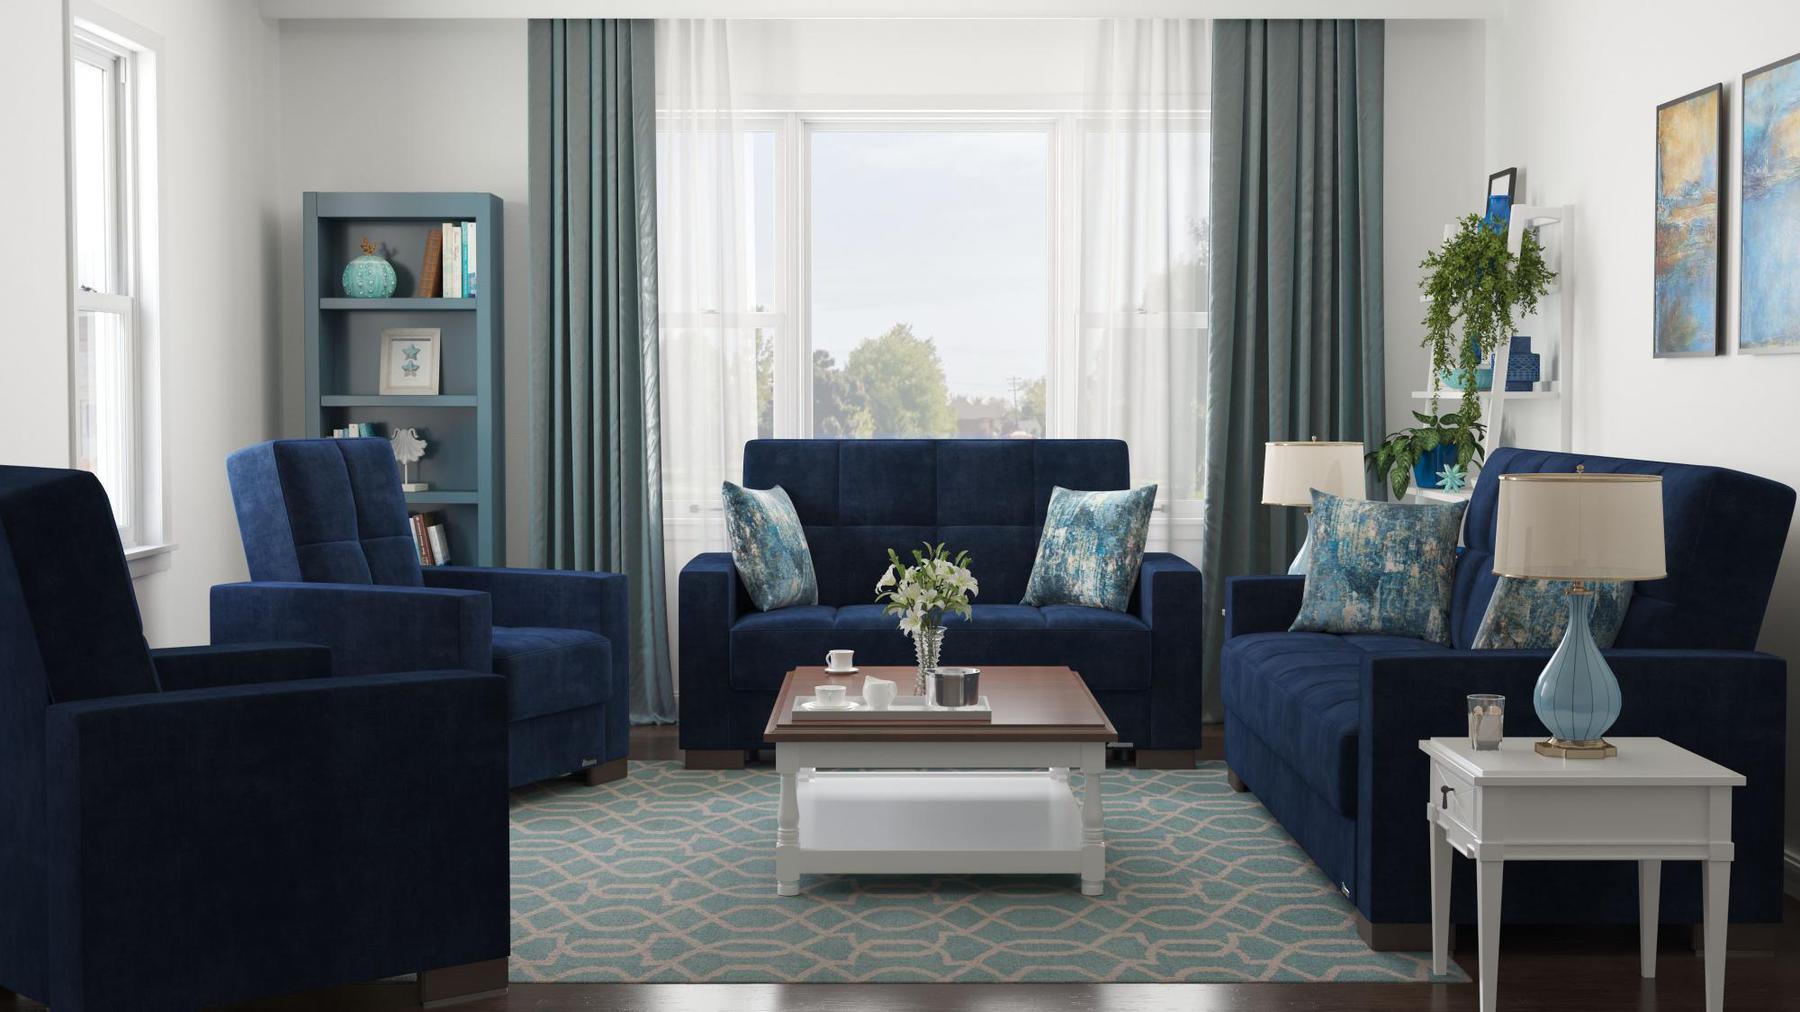 Modern design, True Blue , Microfiber upholstered convertible sleeper Sofabed with underseat storage from Voyage Track by Ottomanson in living room lifestyle setting with the matching furniture set. This Sofabed measures 90 inches width by 36 inches depth by 41 inches height.